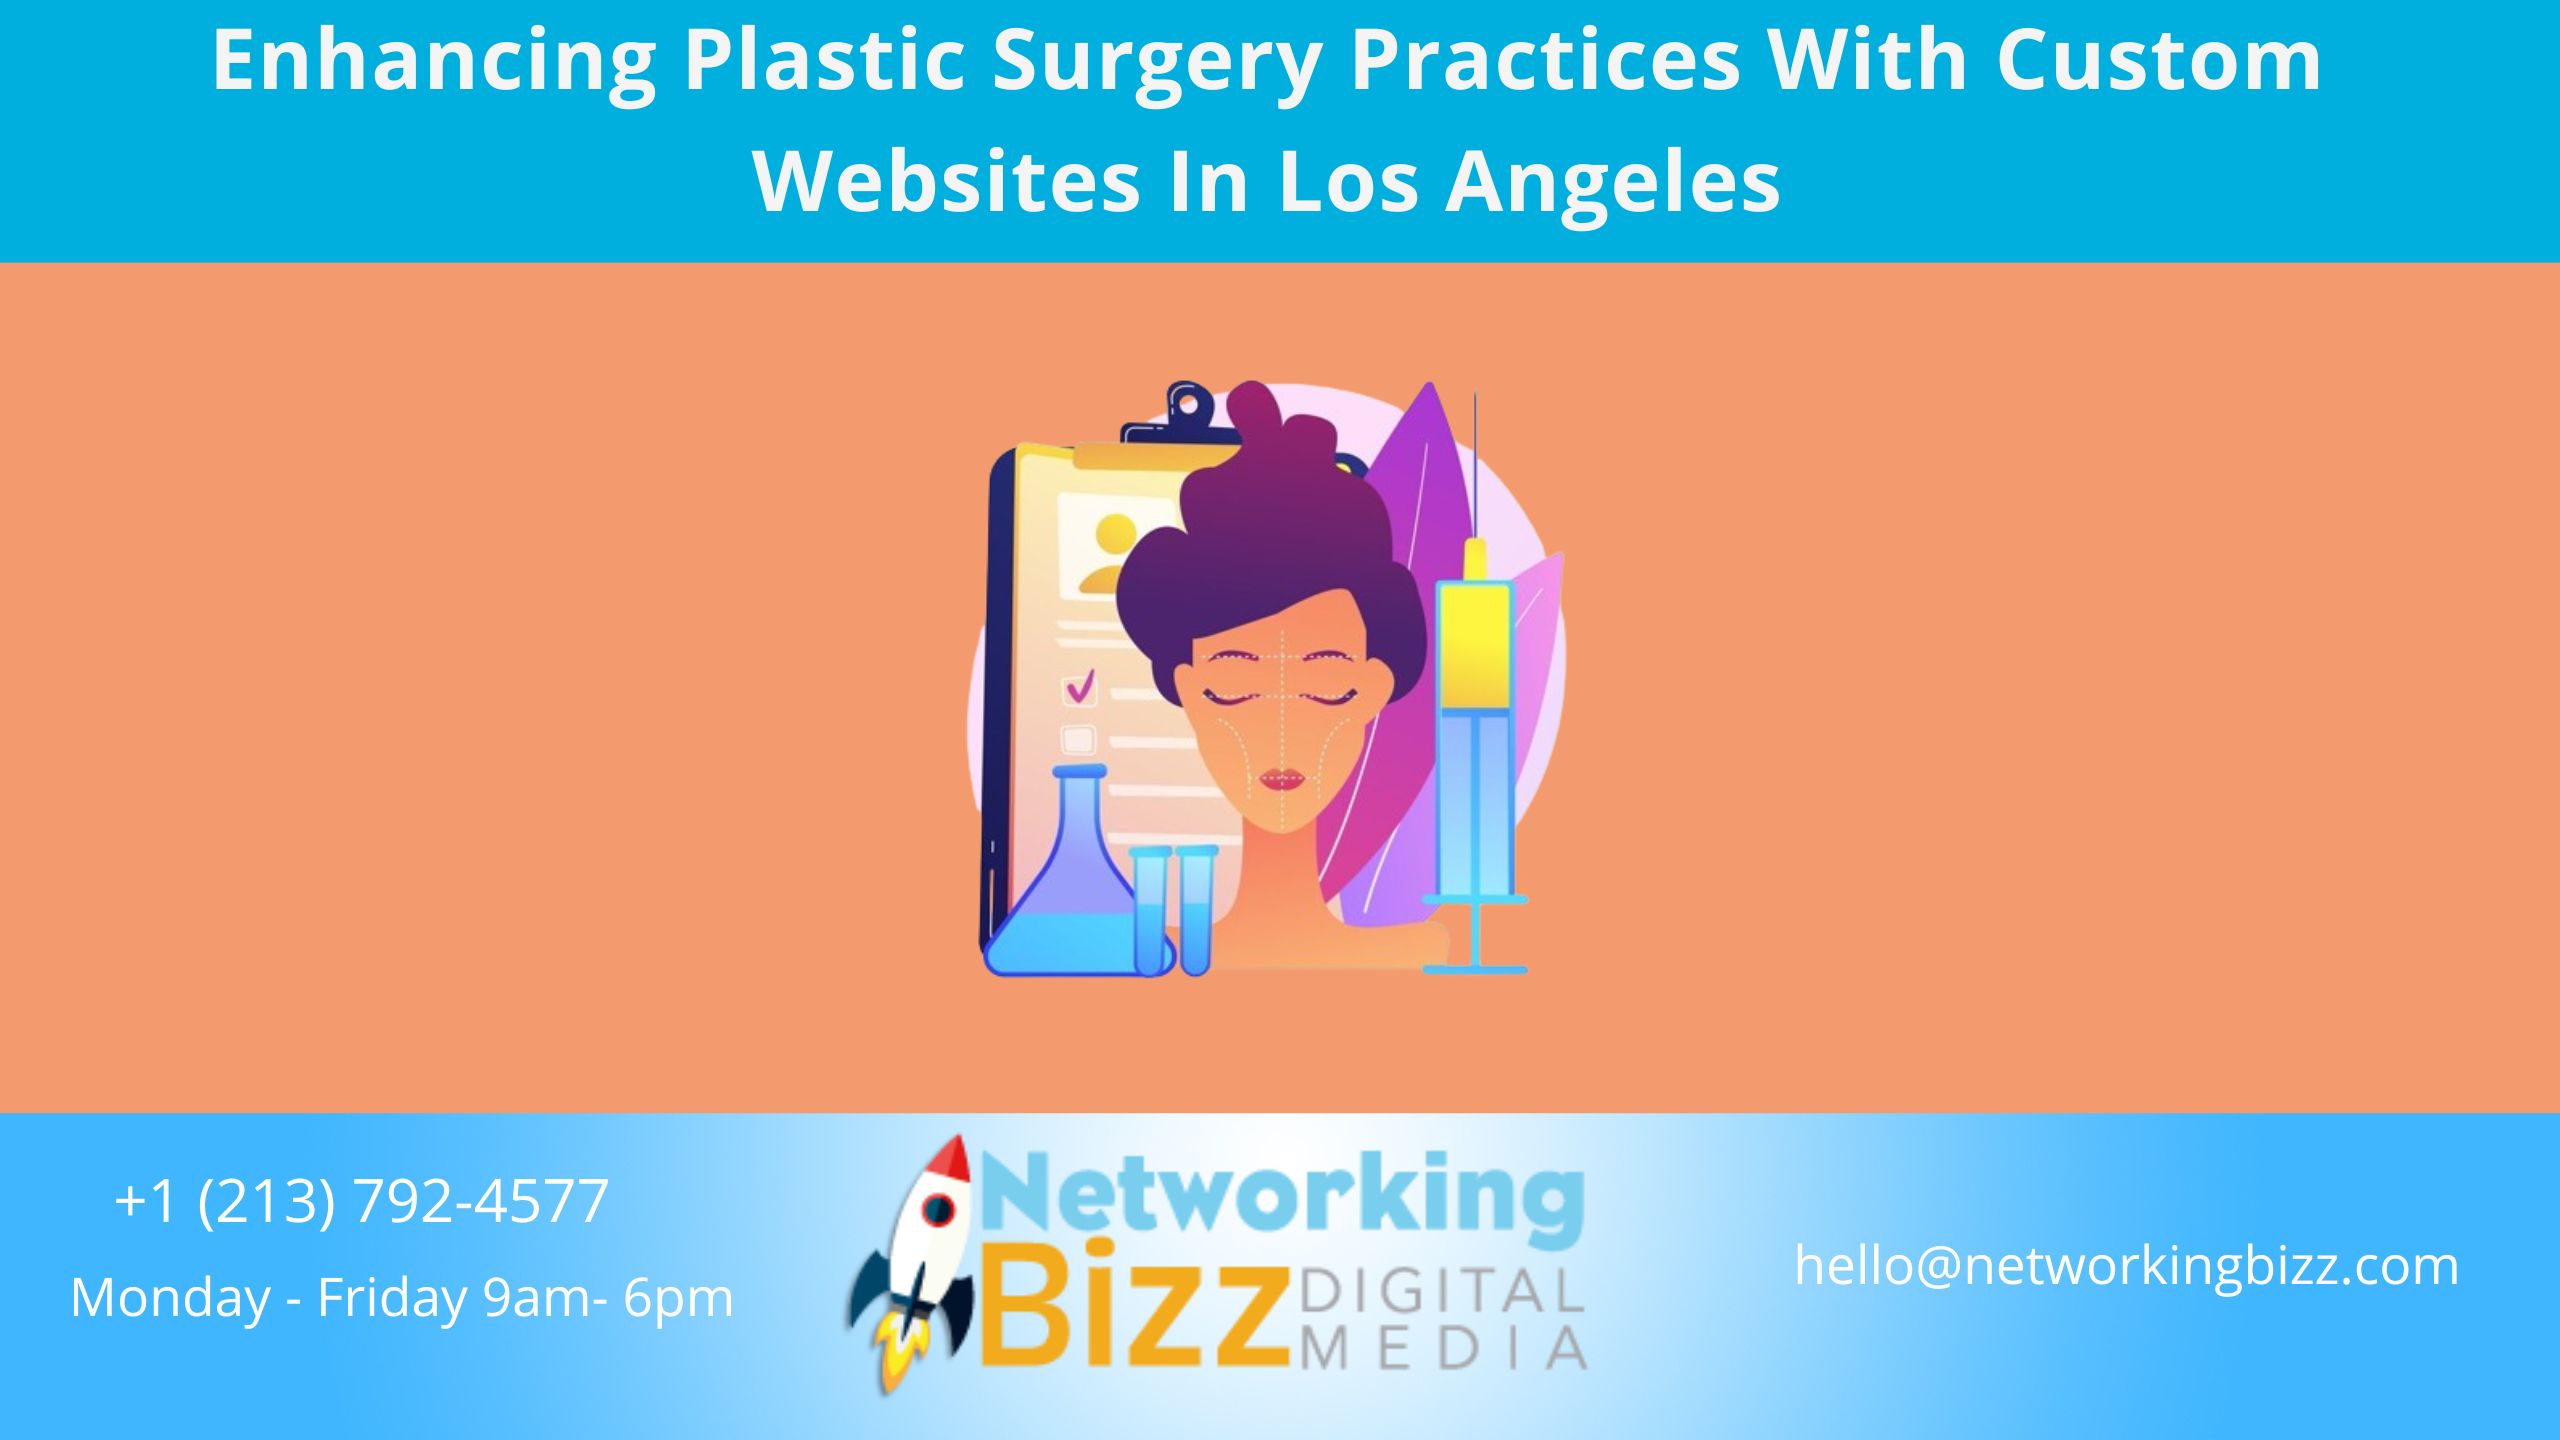 Enhancing Plastic Surgery Practices With Custom Websites In Los Angeles